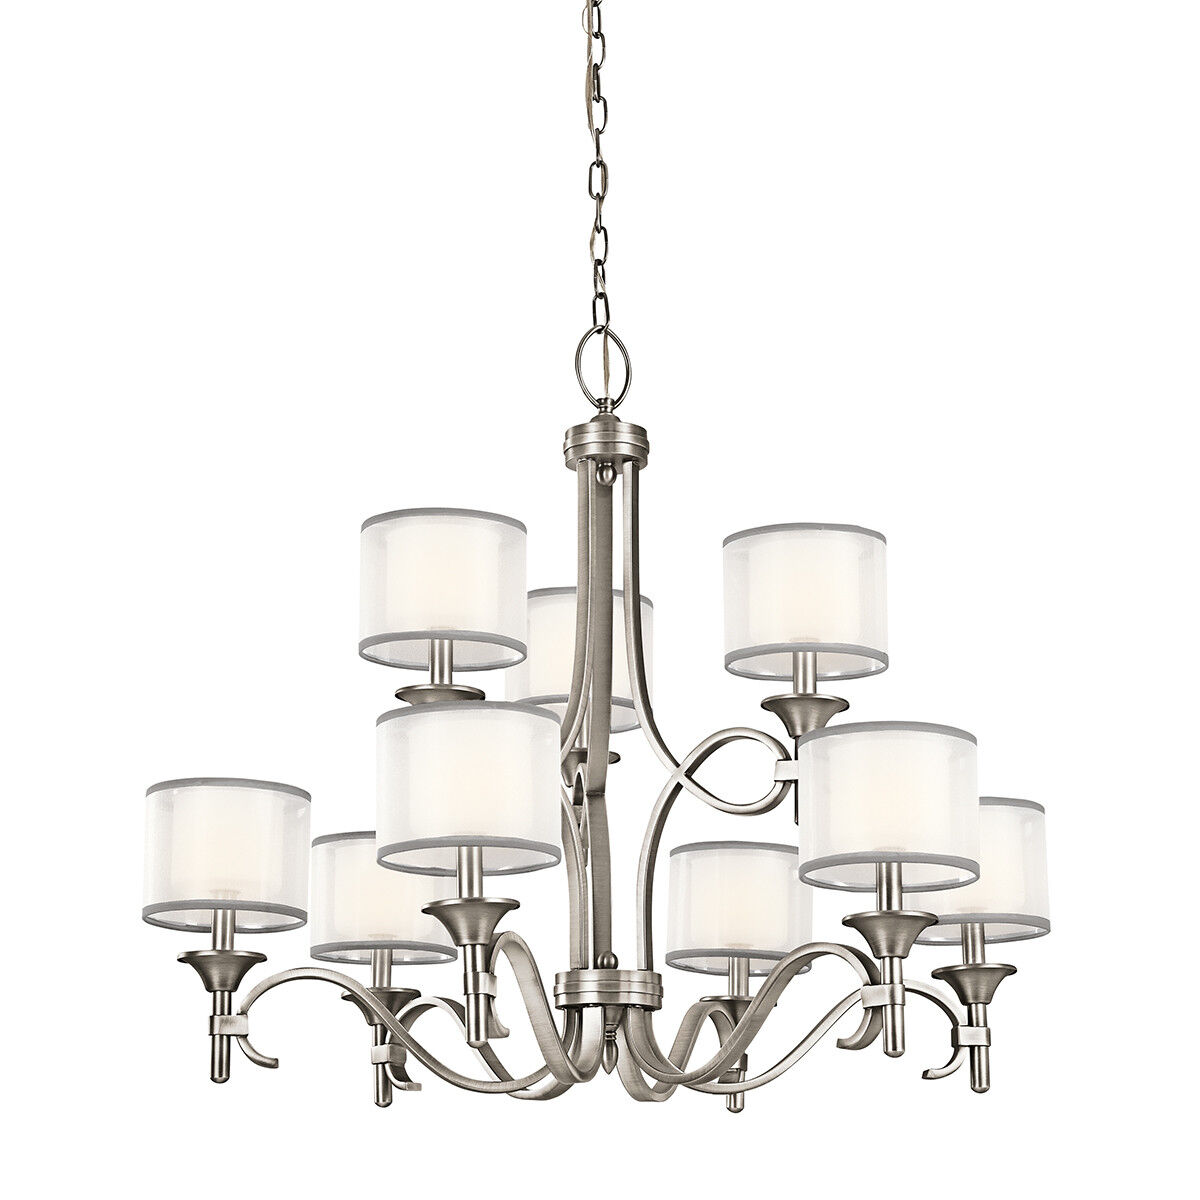 Elstead Lighting Lacey 9 Light Chandelier, Antique Pewter, E14